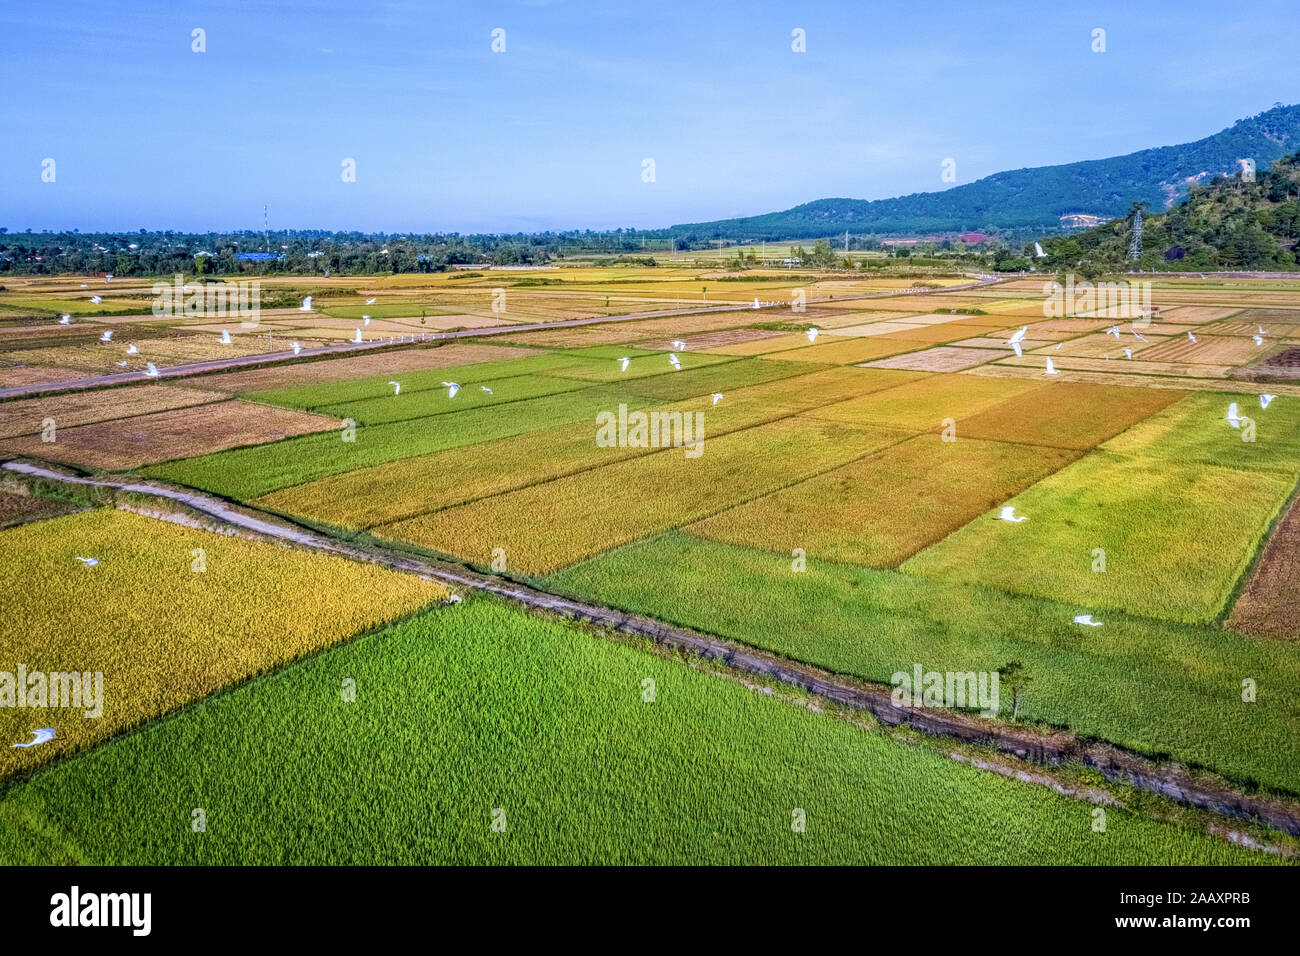 Aerial view of Ngo Son rice field, Gia Lai, Vietnam. Royalty high-quality free stock image landscape of terrace rice fields in Vietnam Stock Photo